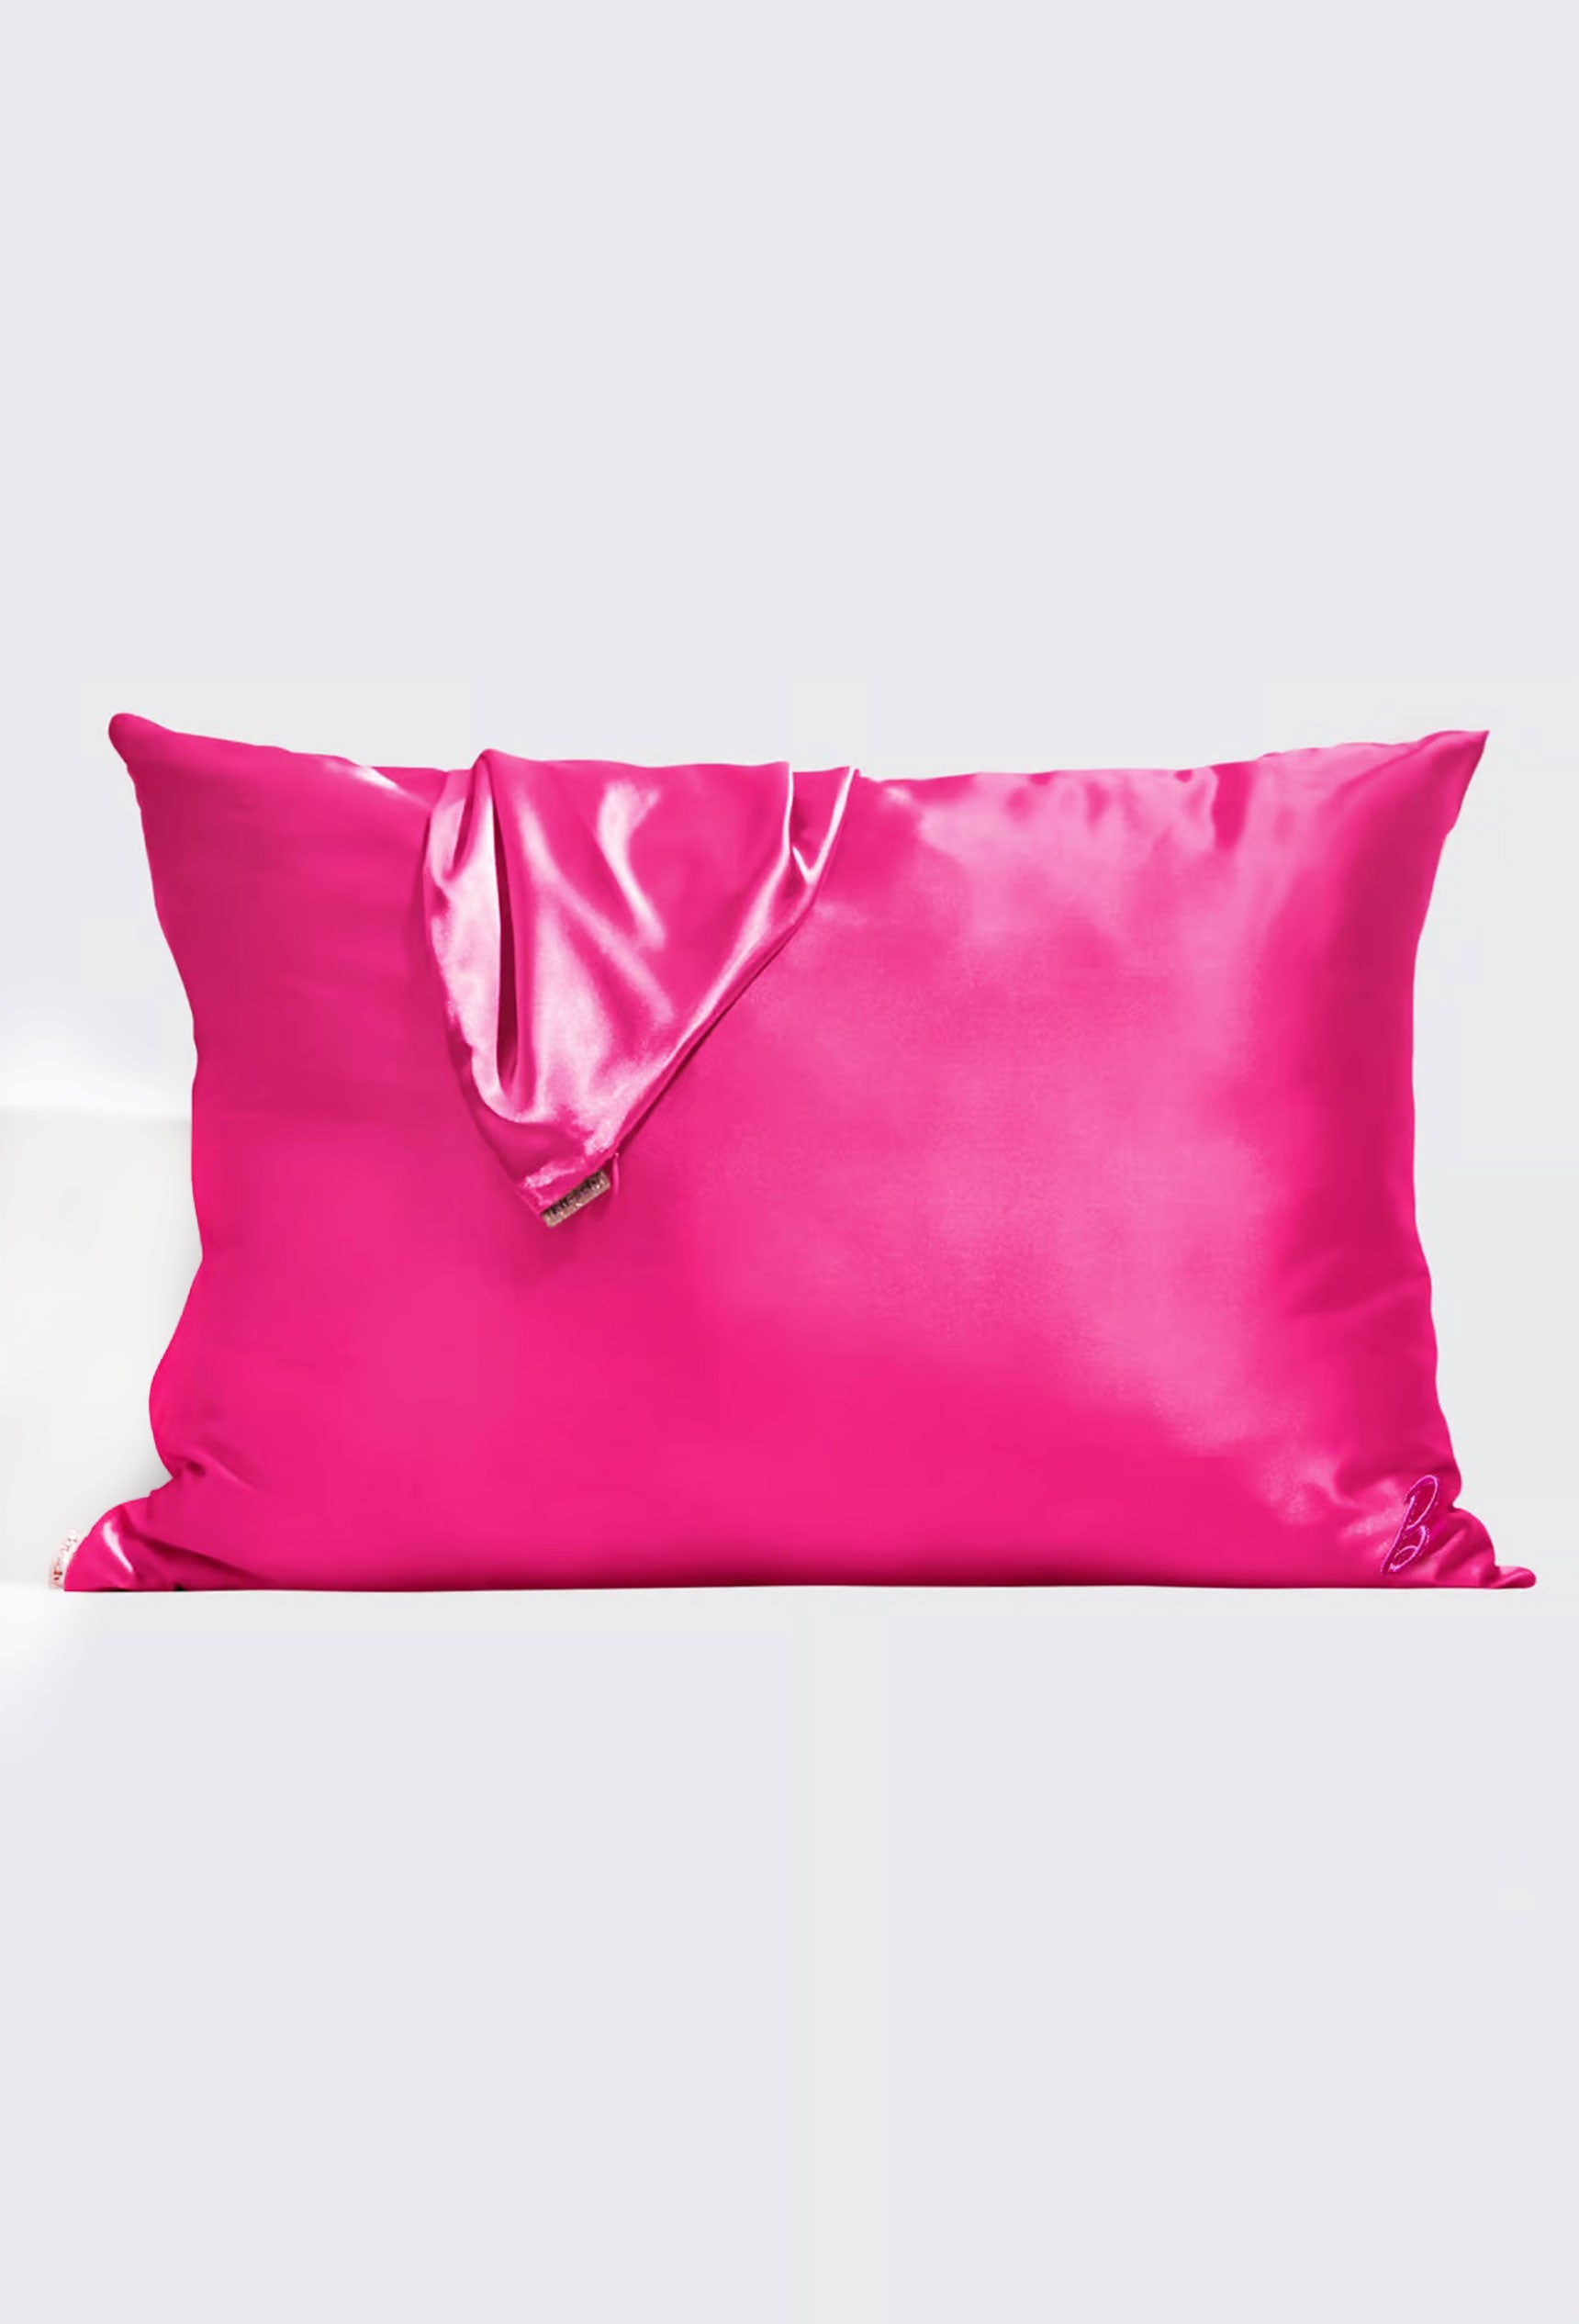 Pink Silk pillow case with barbie letter "B" embroidered on it